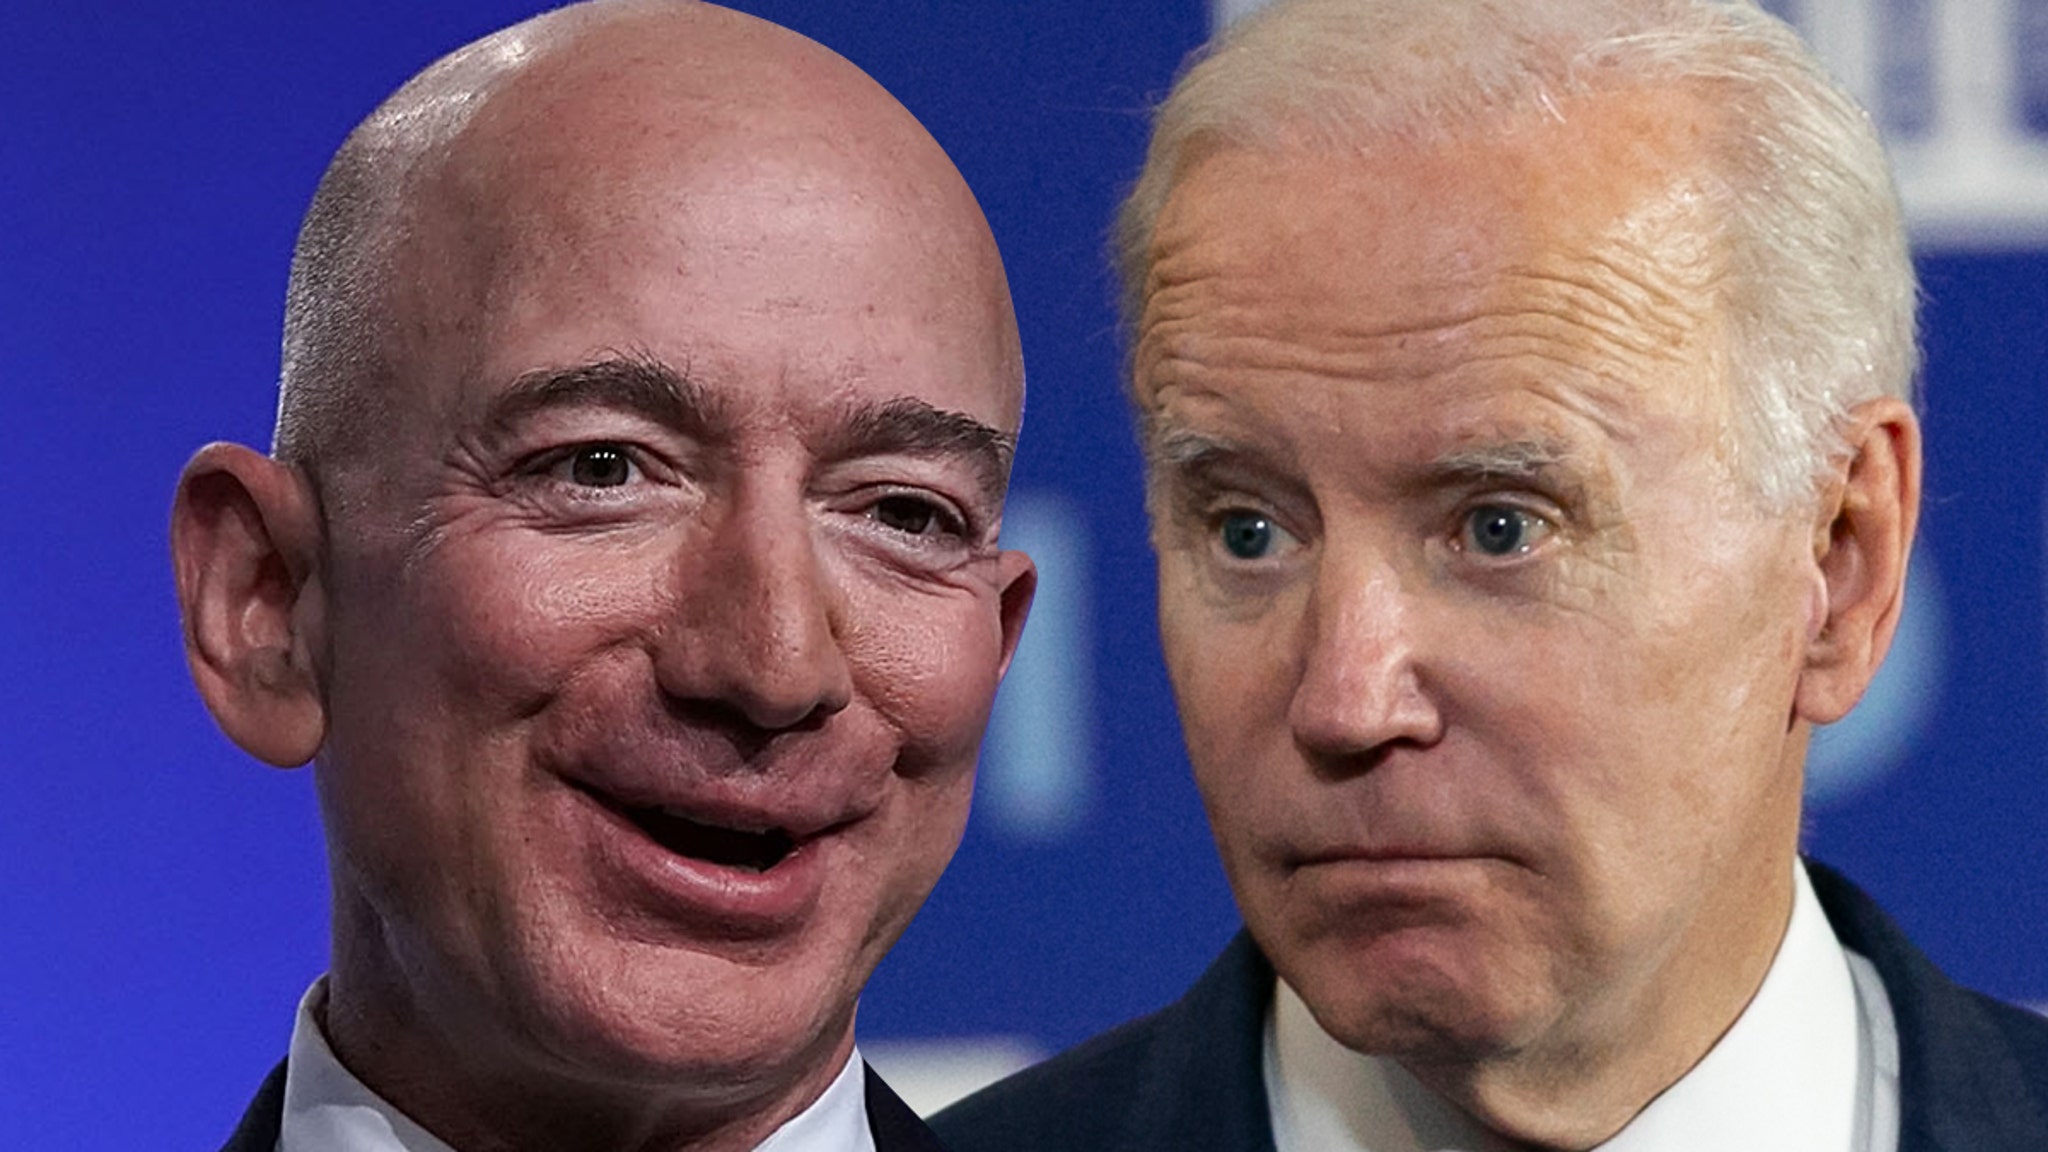 Jeff Bezos Takes Aim at Biden Administration Over Inflation Tweets